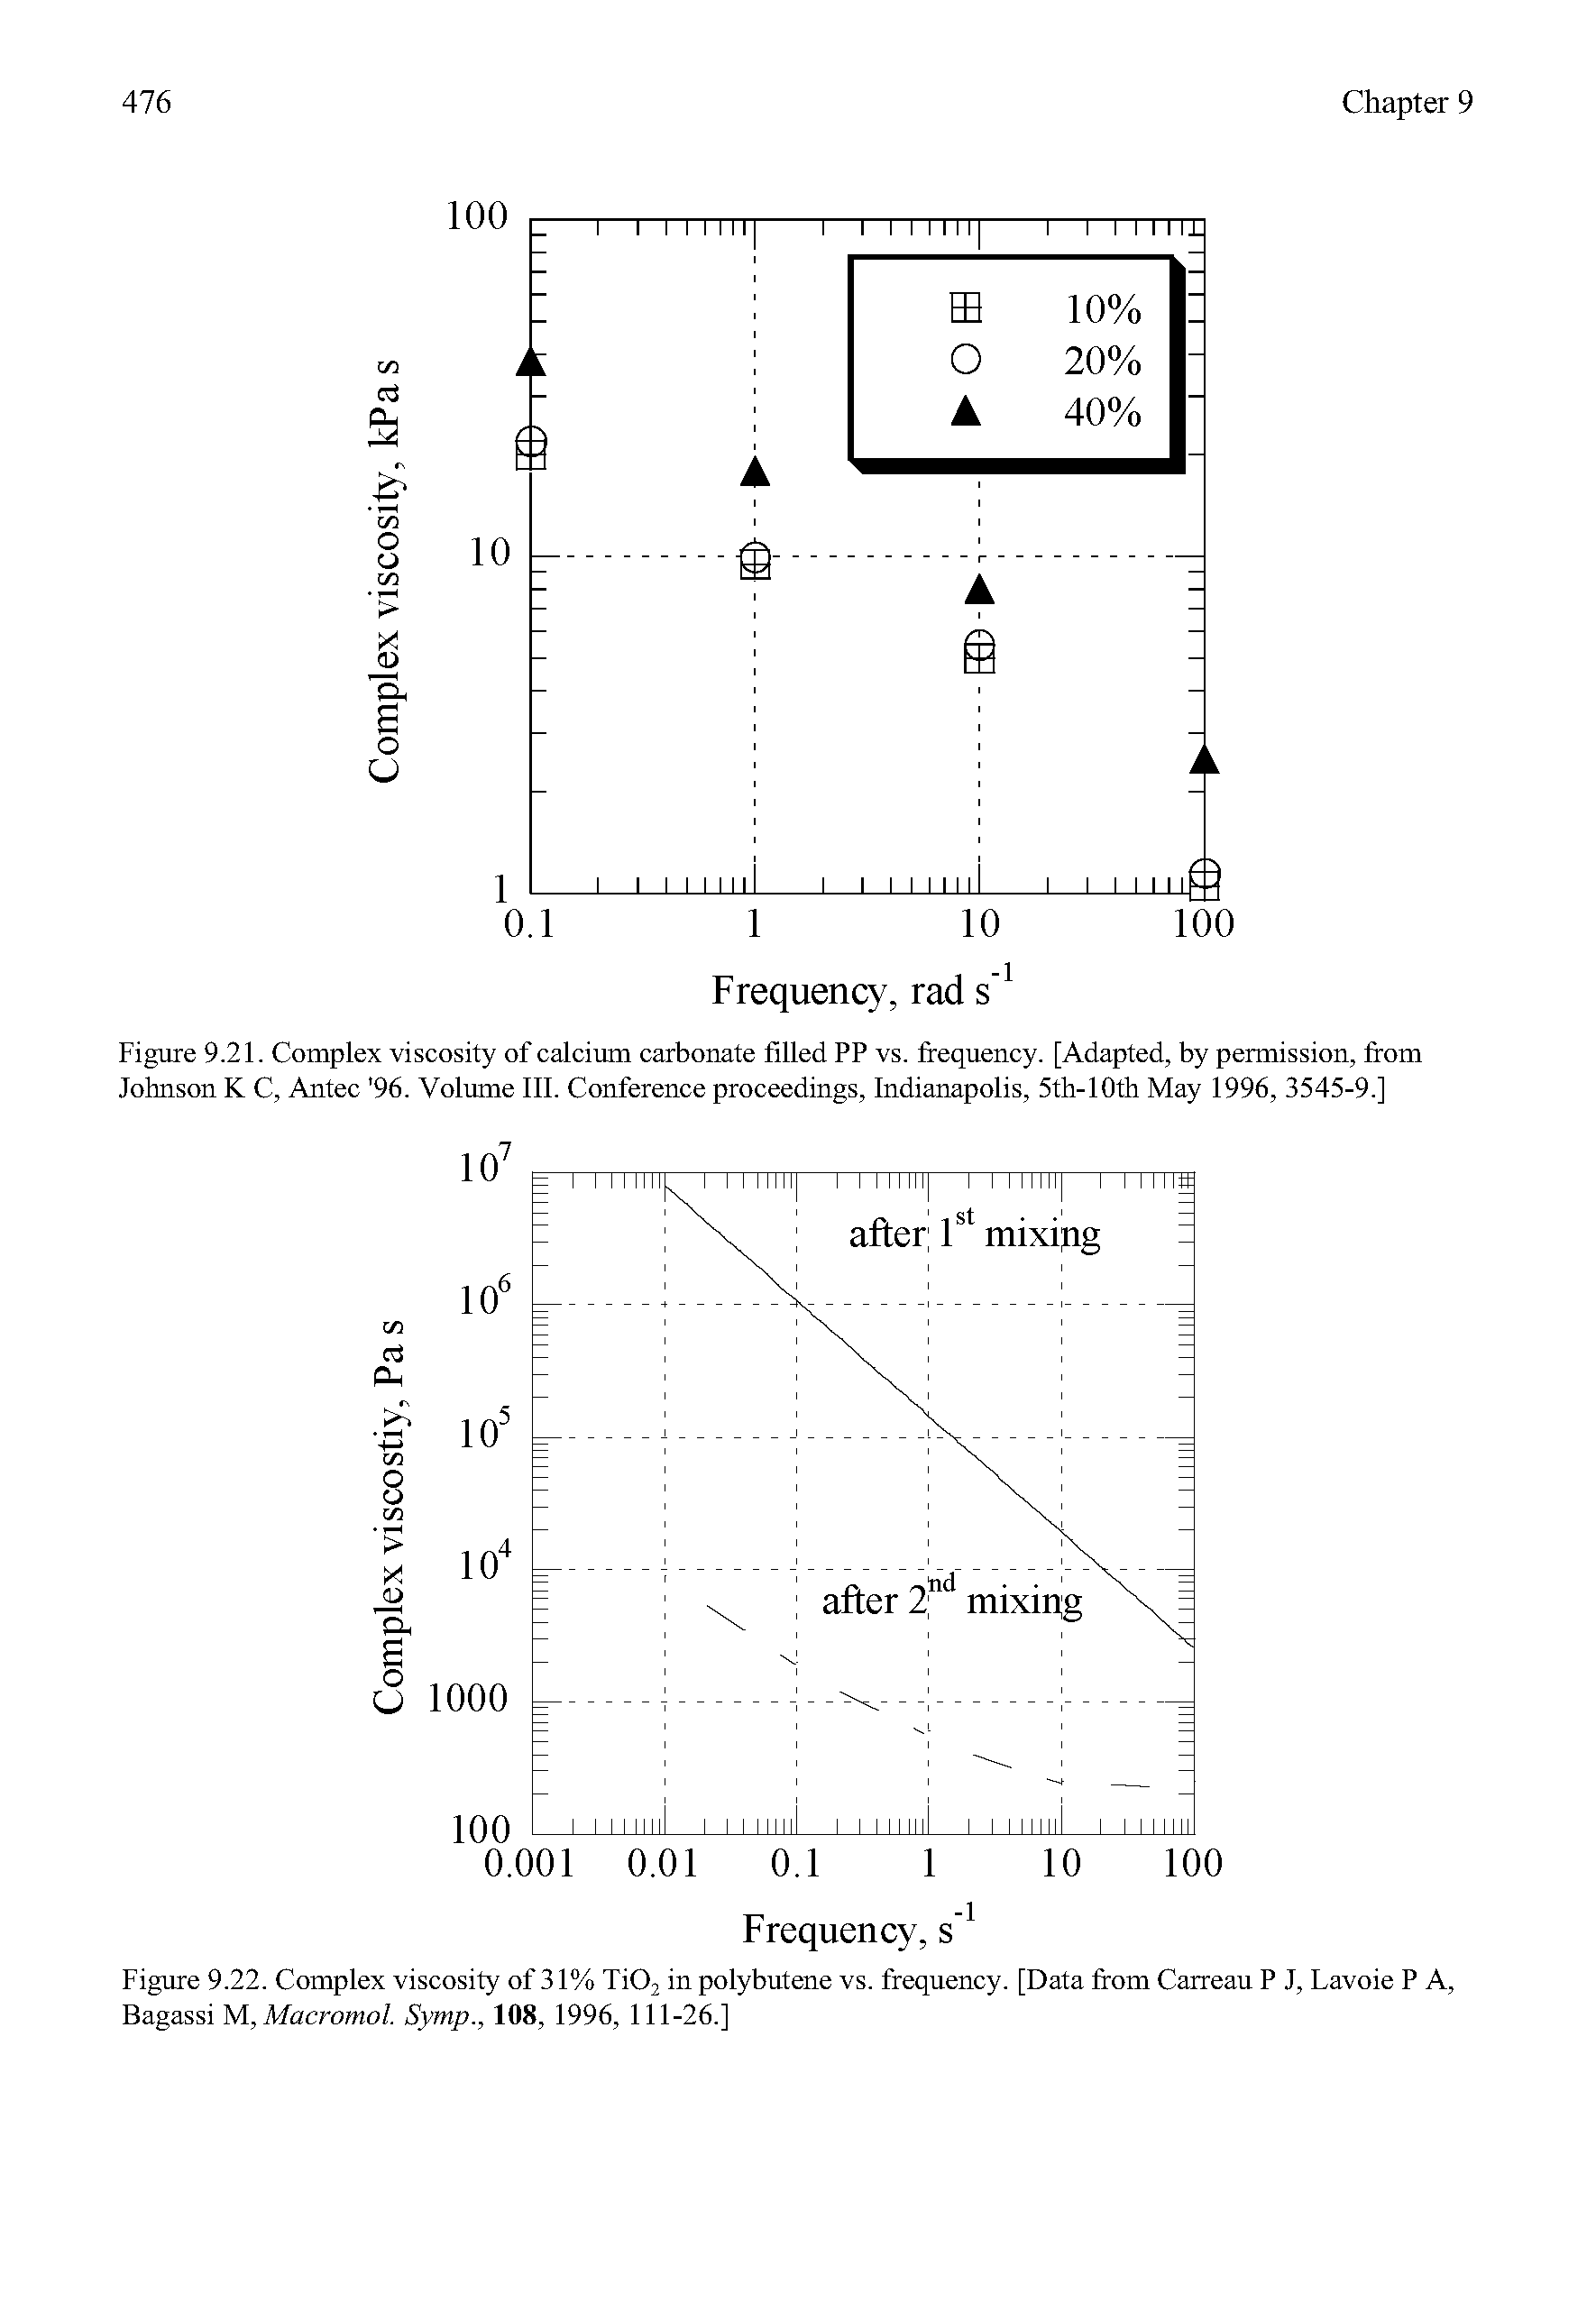 Figure 9.21. Complex viscosity of calcium carbonate filled PP vs. frequency. [Adapted, by permission, from Johnson K C, Antec 96. Volume III. Conference proceedings, Indianapolis, 5th-10th May 1996, 3545-9.]...